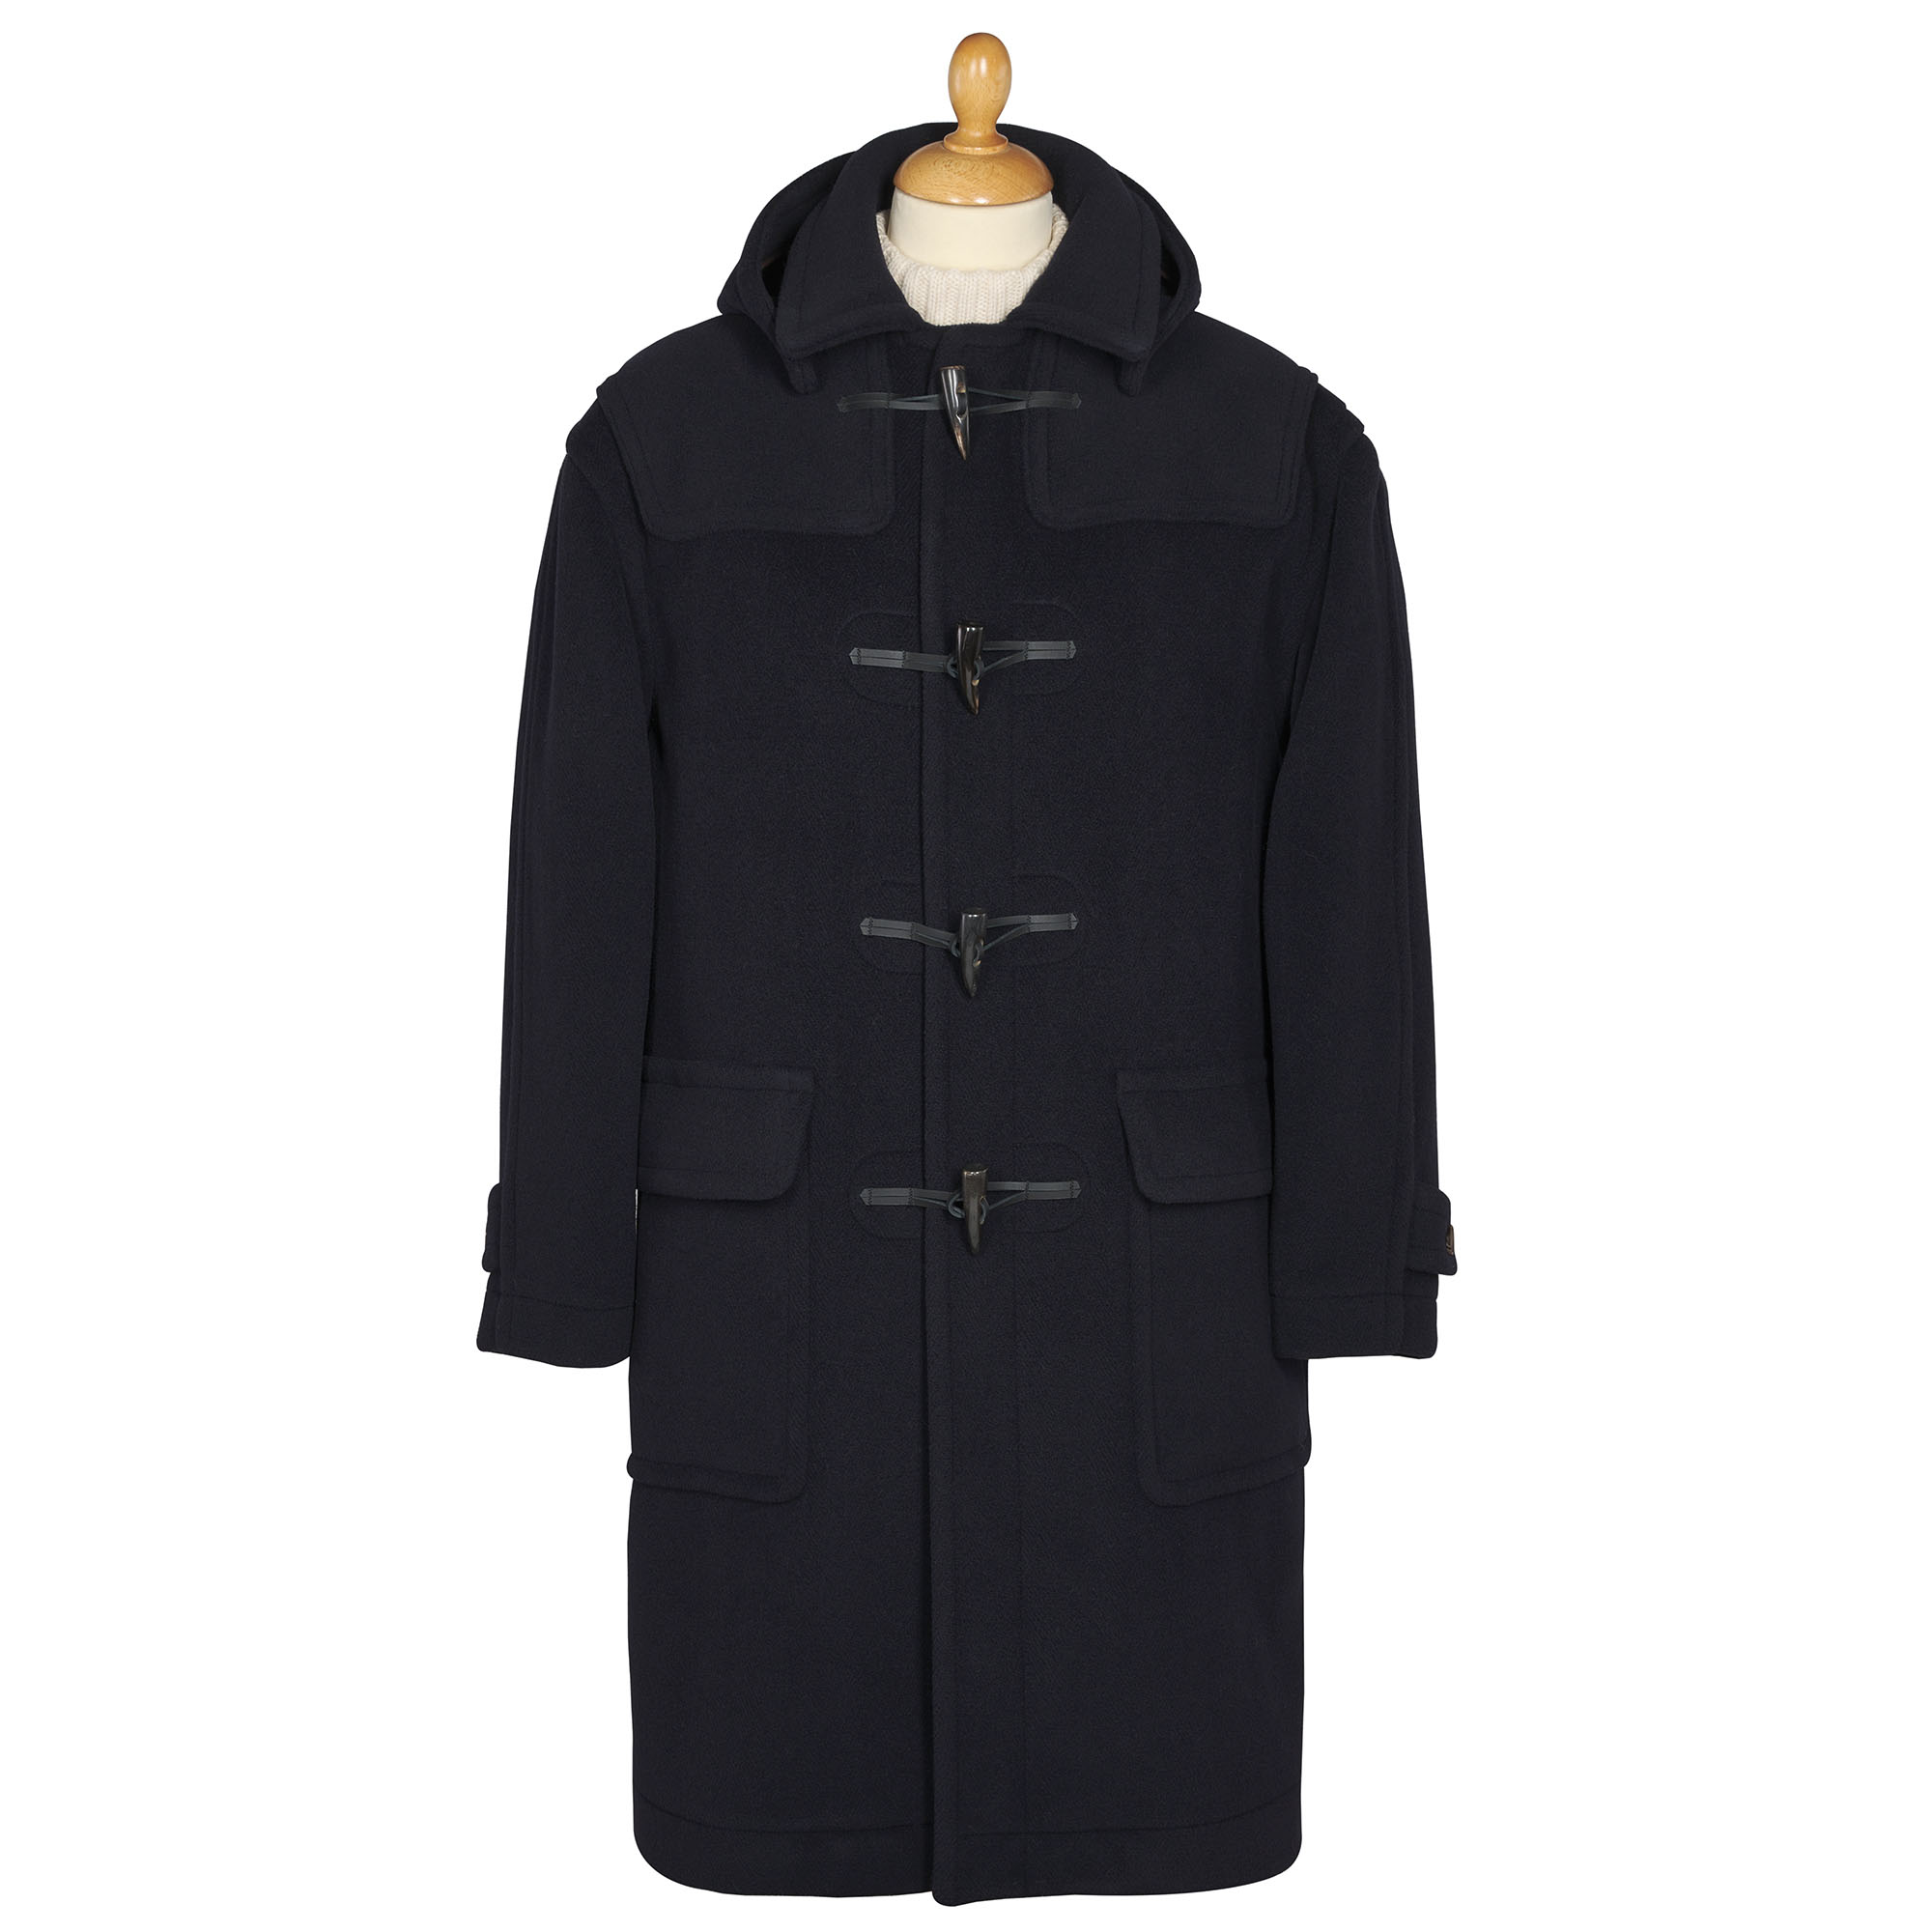 British Made Loden Duffle Coat | Men's Country Clothing | Cordings US